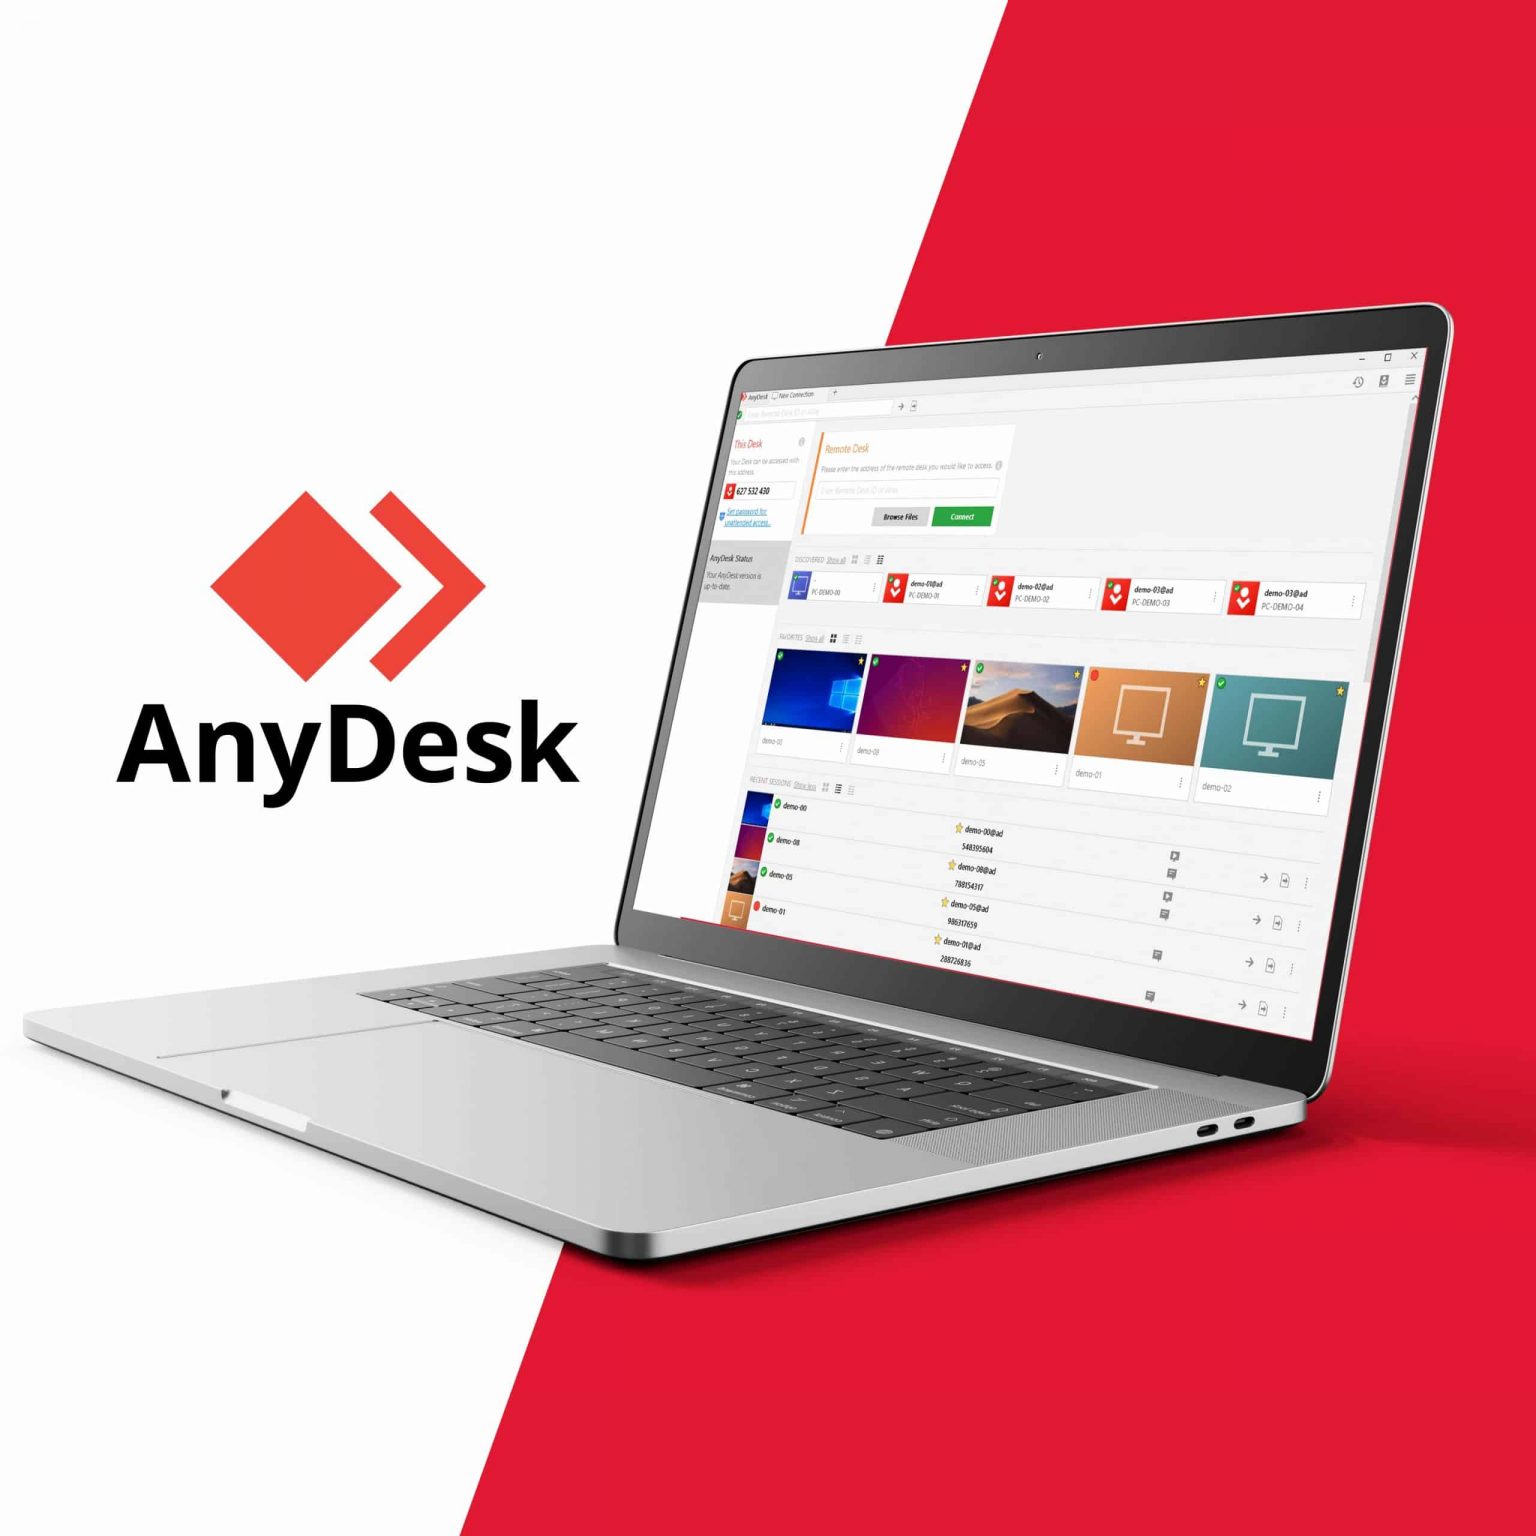 what is anydesk used for